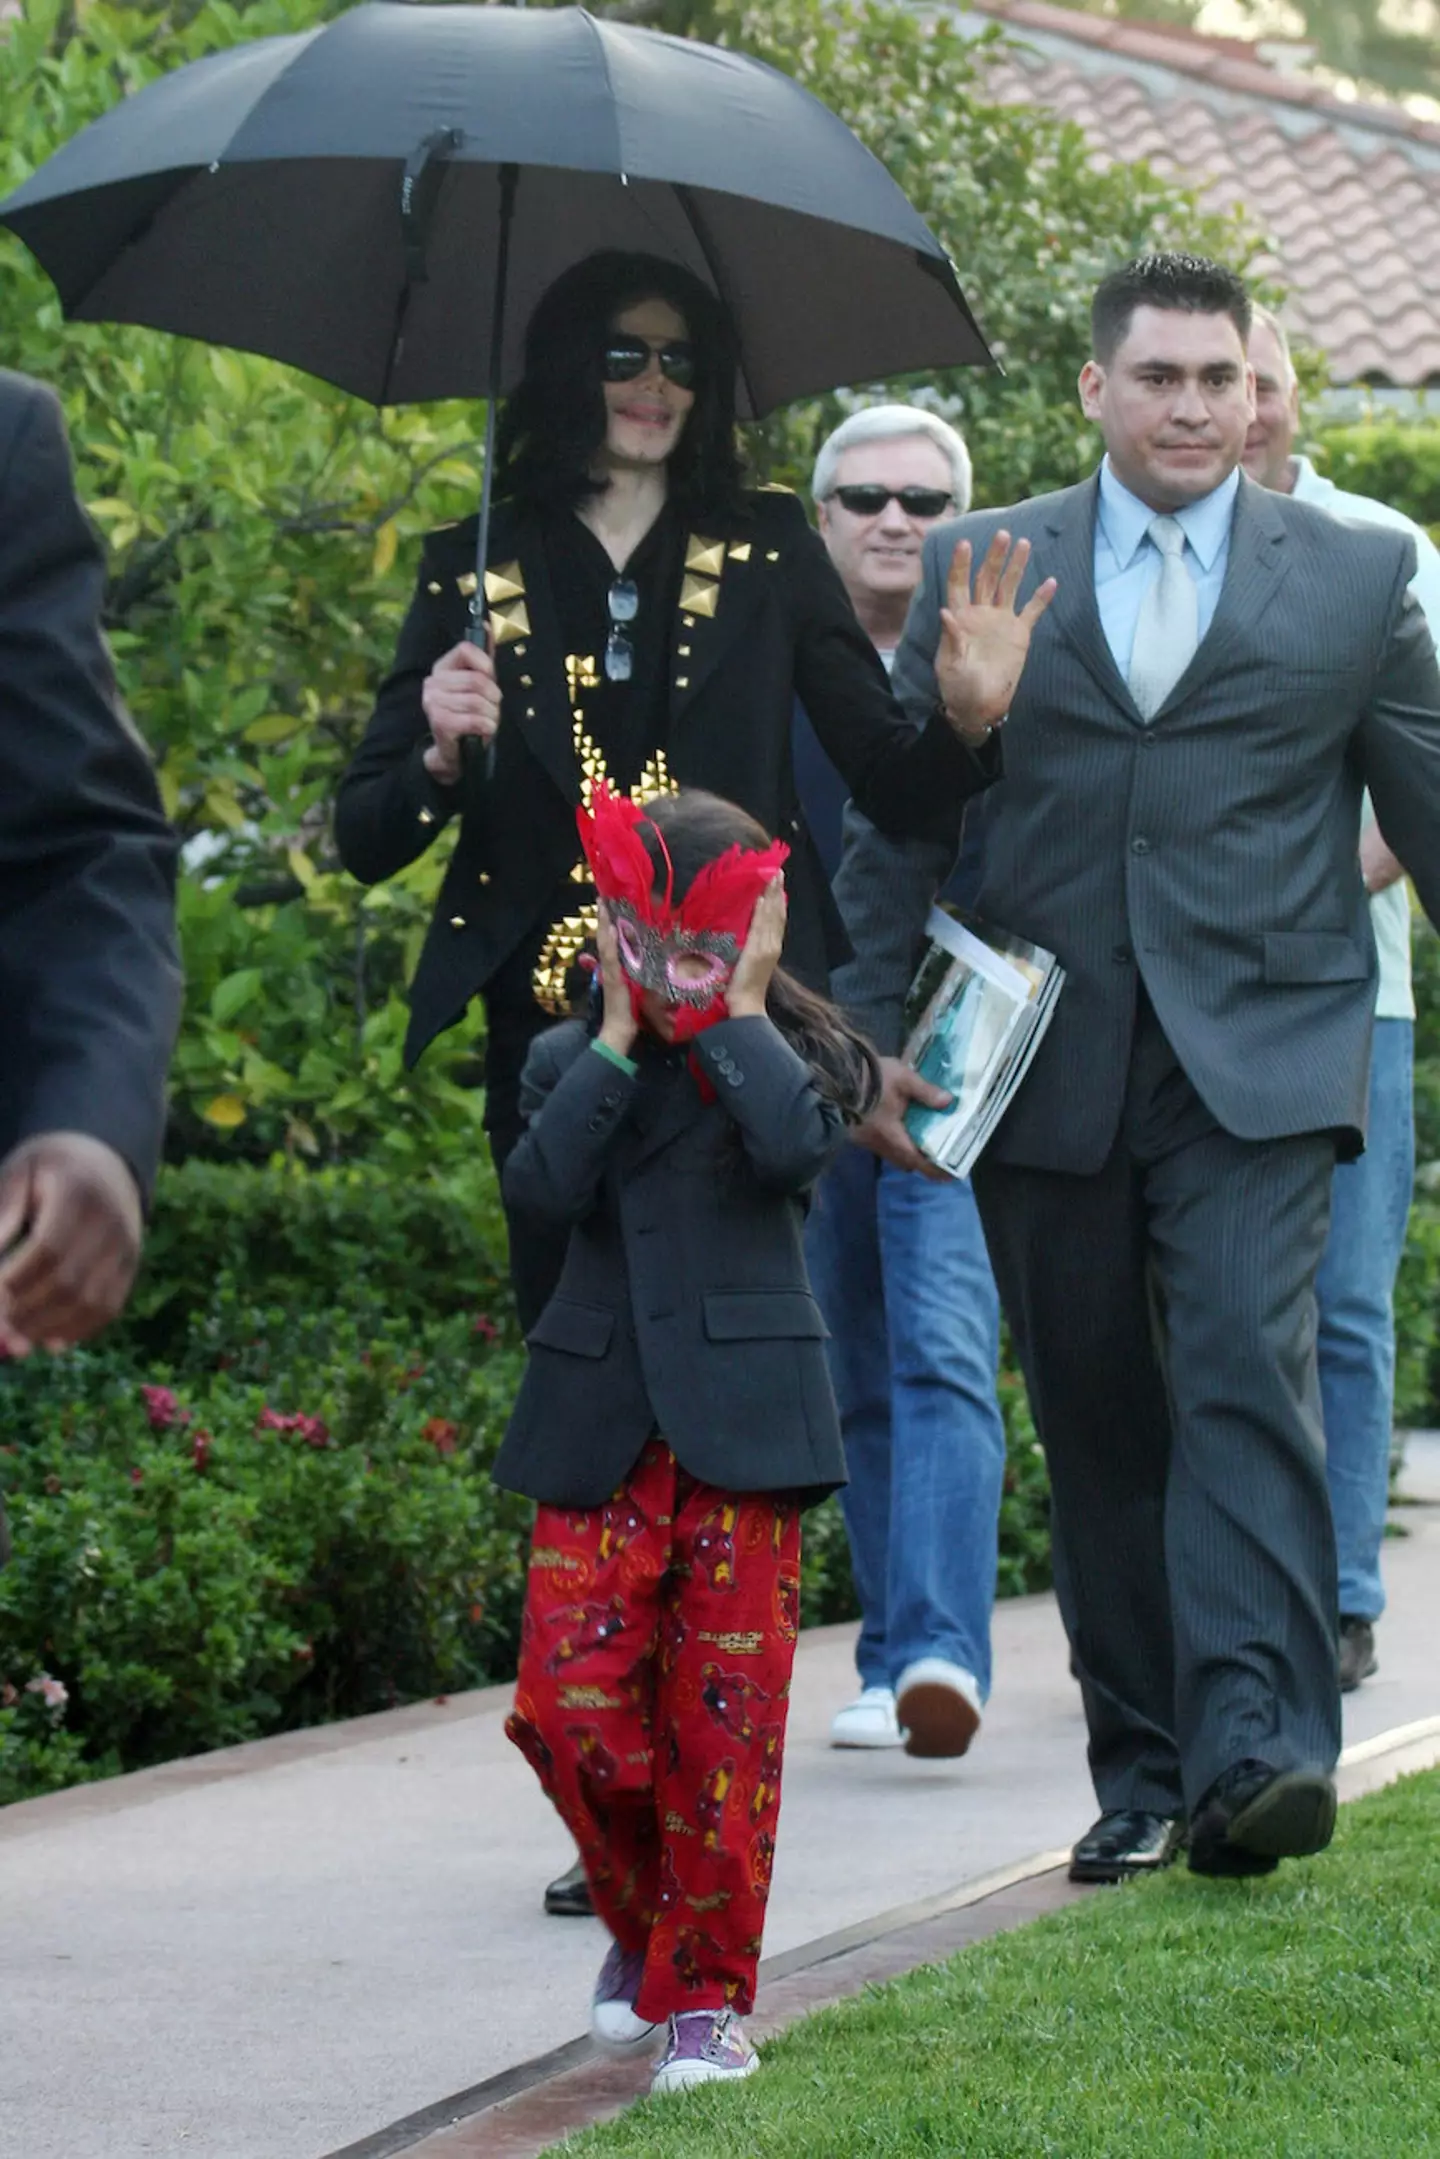 Prince Jackson said his father 'earnt' the title of 'King of Pop'.